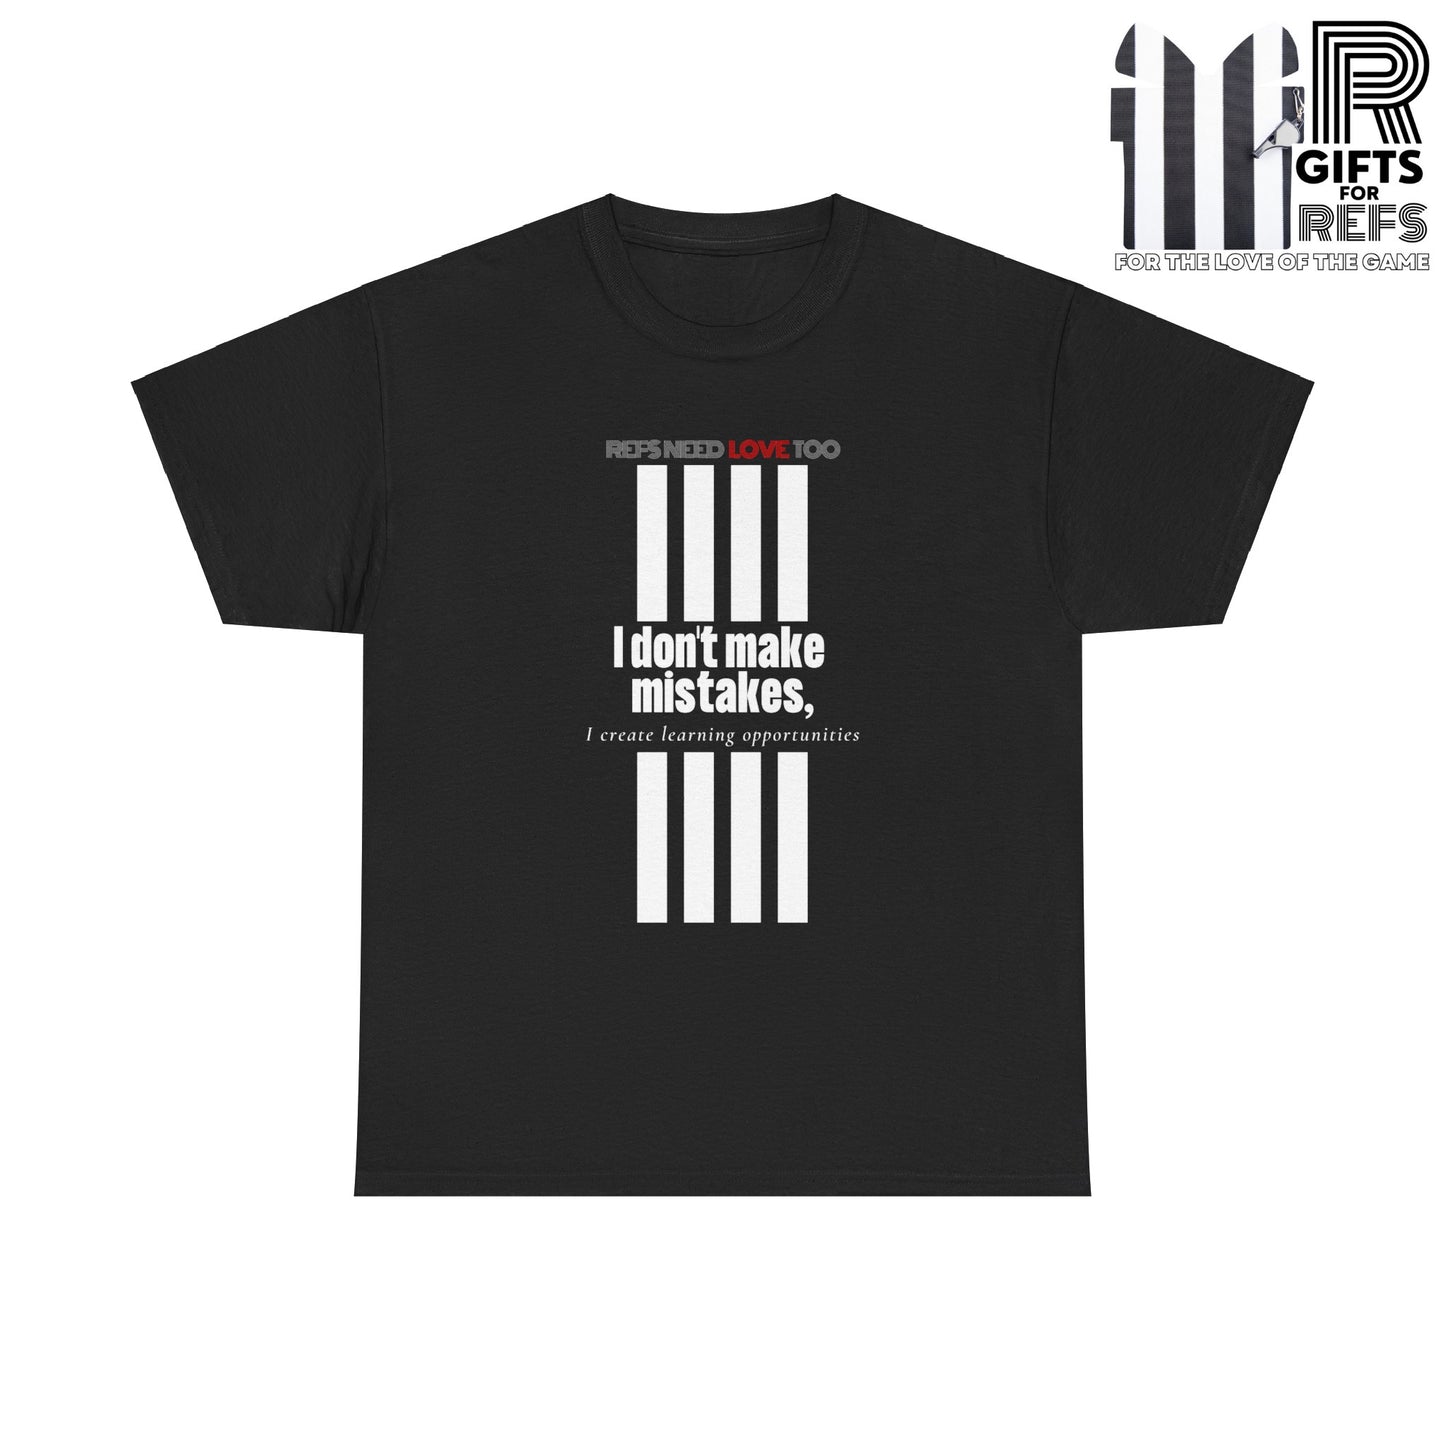 I don't make mistakes cotton tee | white lettering | Referee t shirt | Great Gifts for refs and umps | screen printed t shirt | Referee apparel | Refs Need Love Too